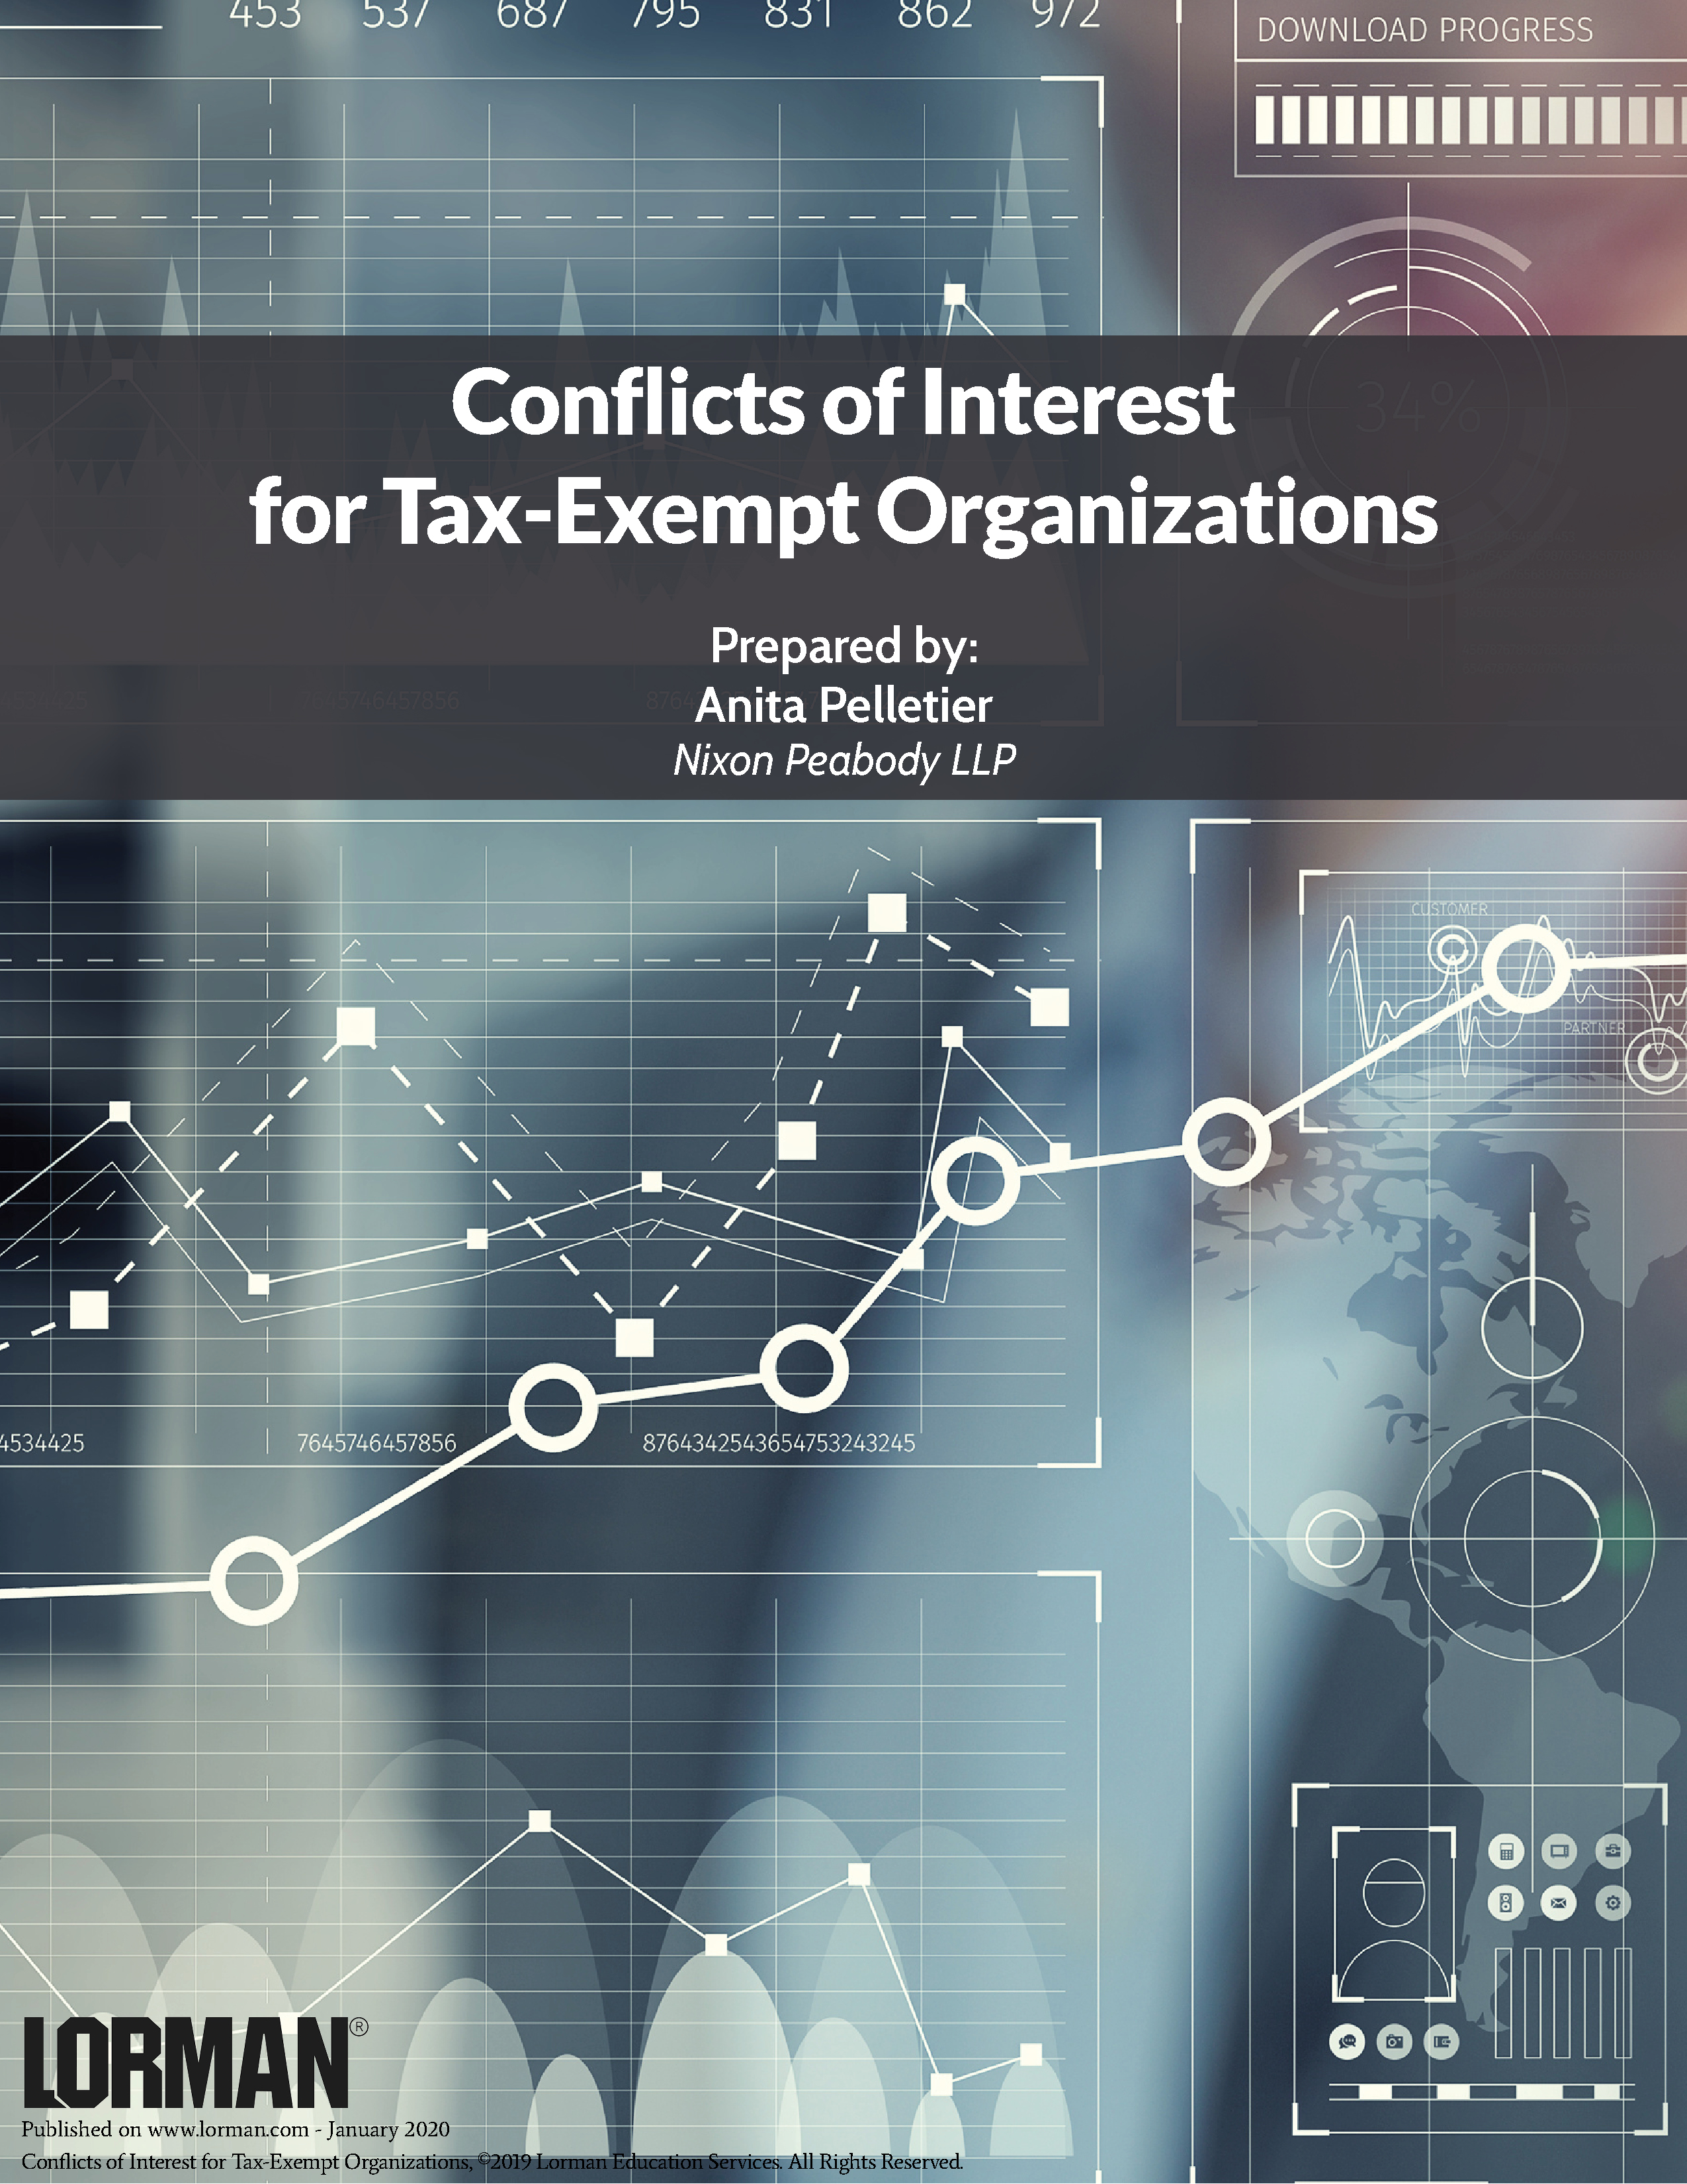 Conflicts of Interest for Tax-Exempt Organizations